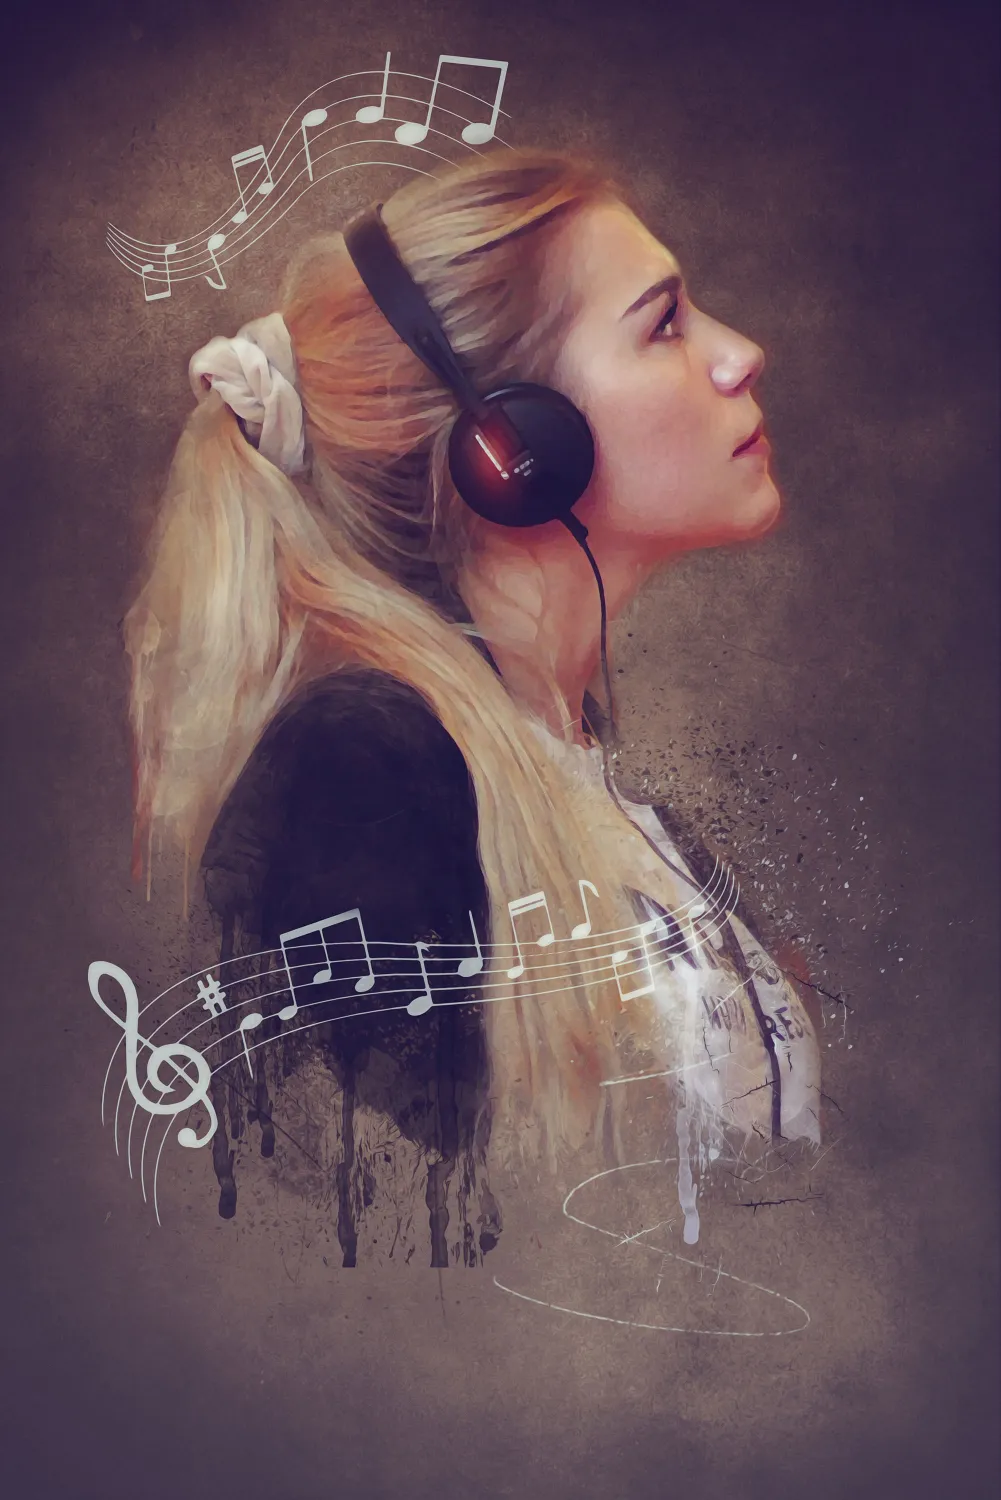 thumb for Woman With Headphones Wallpaper